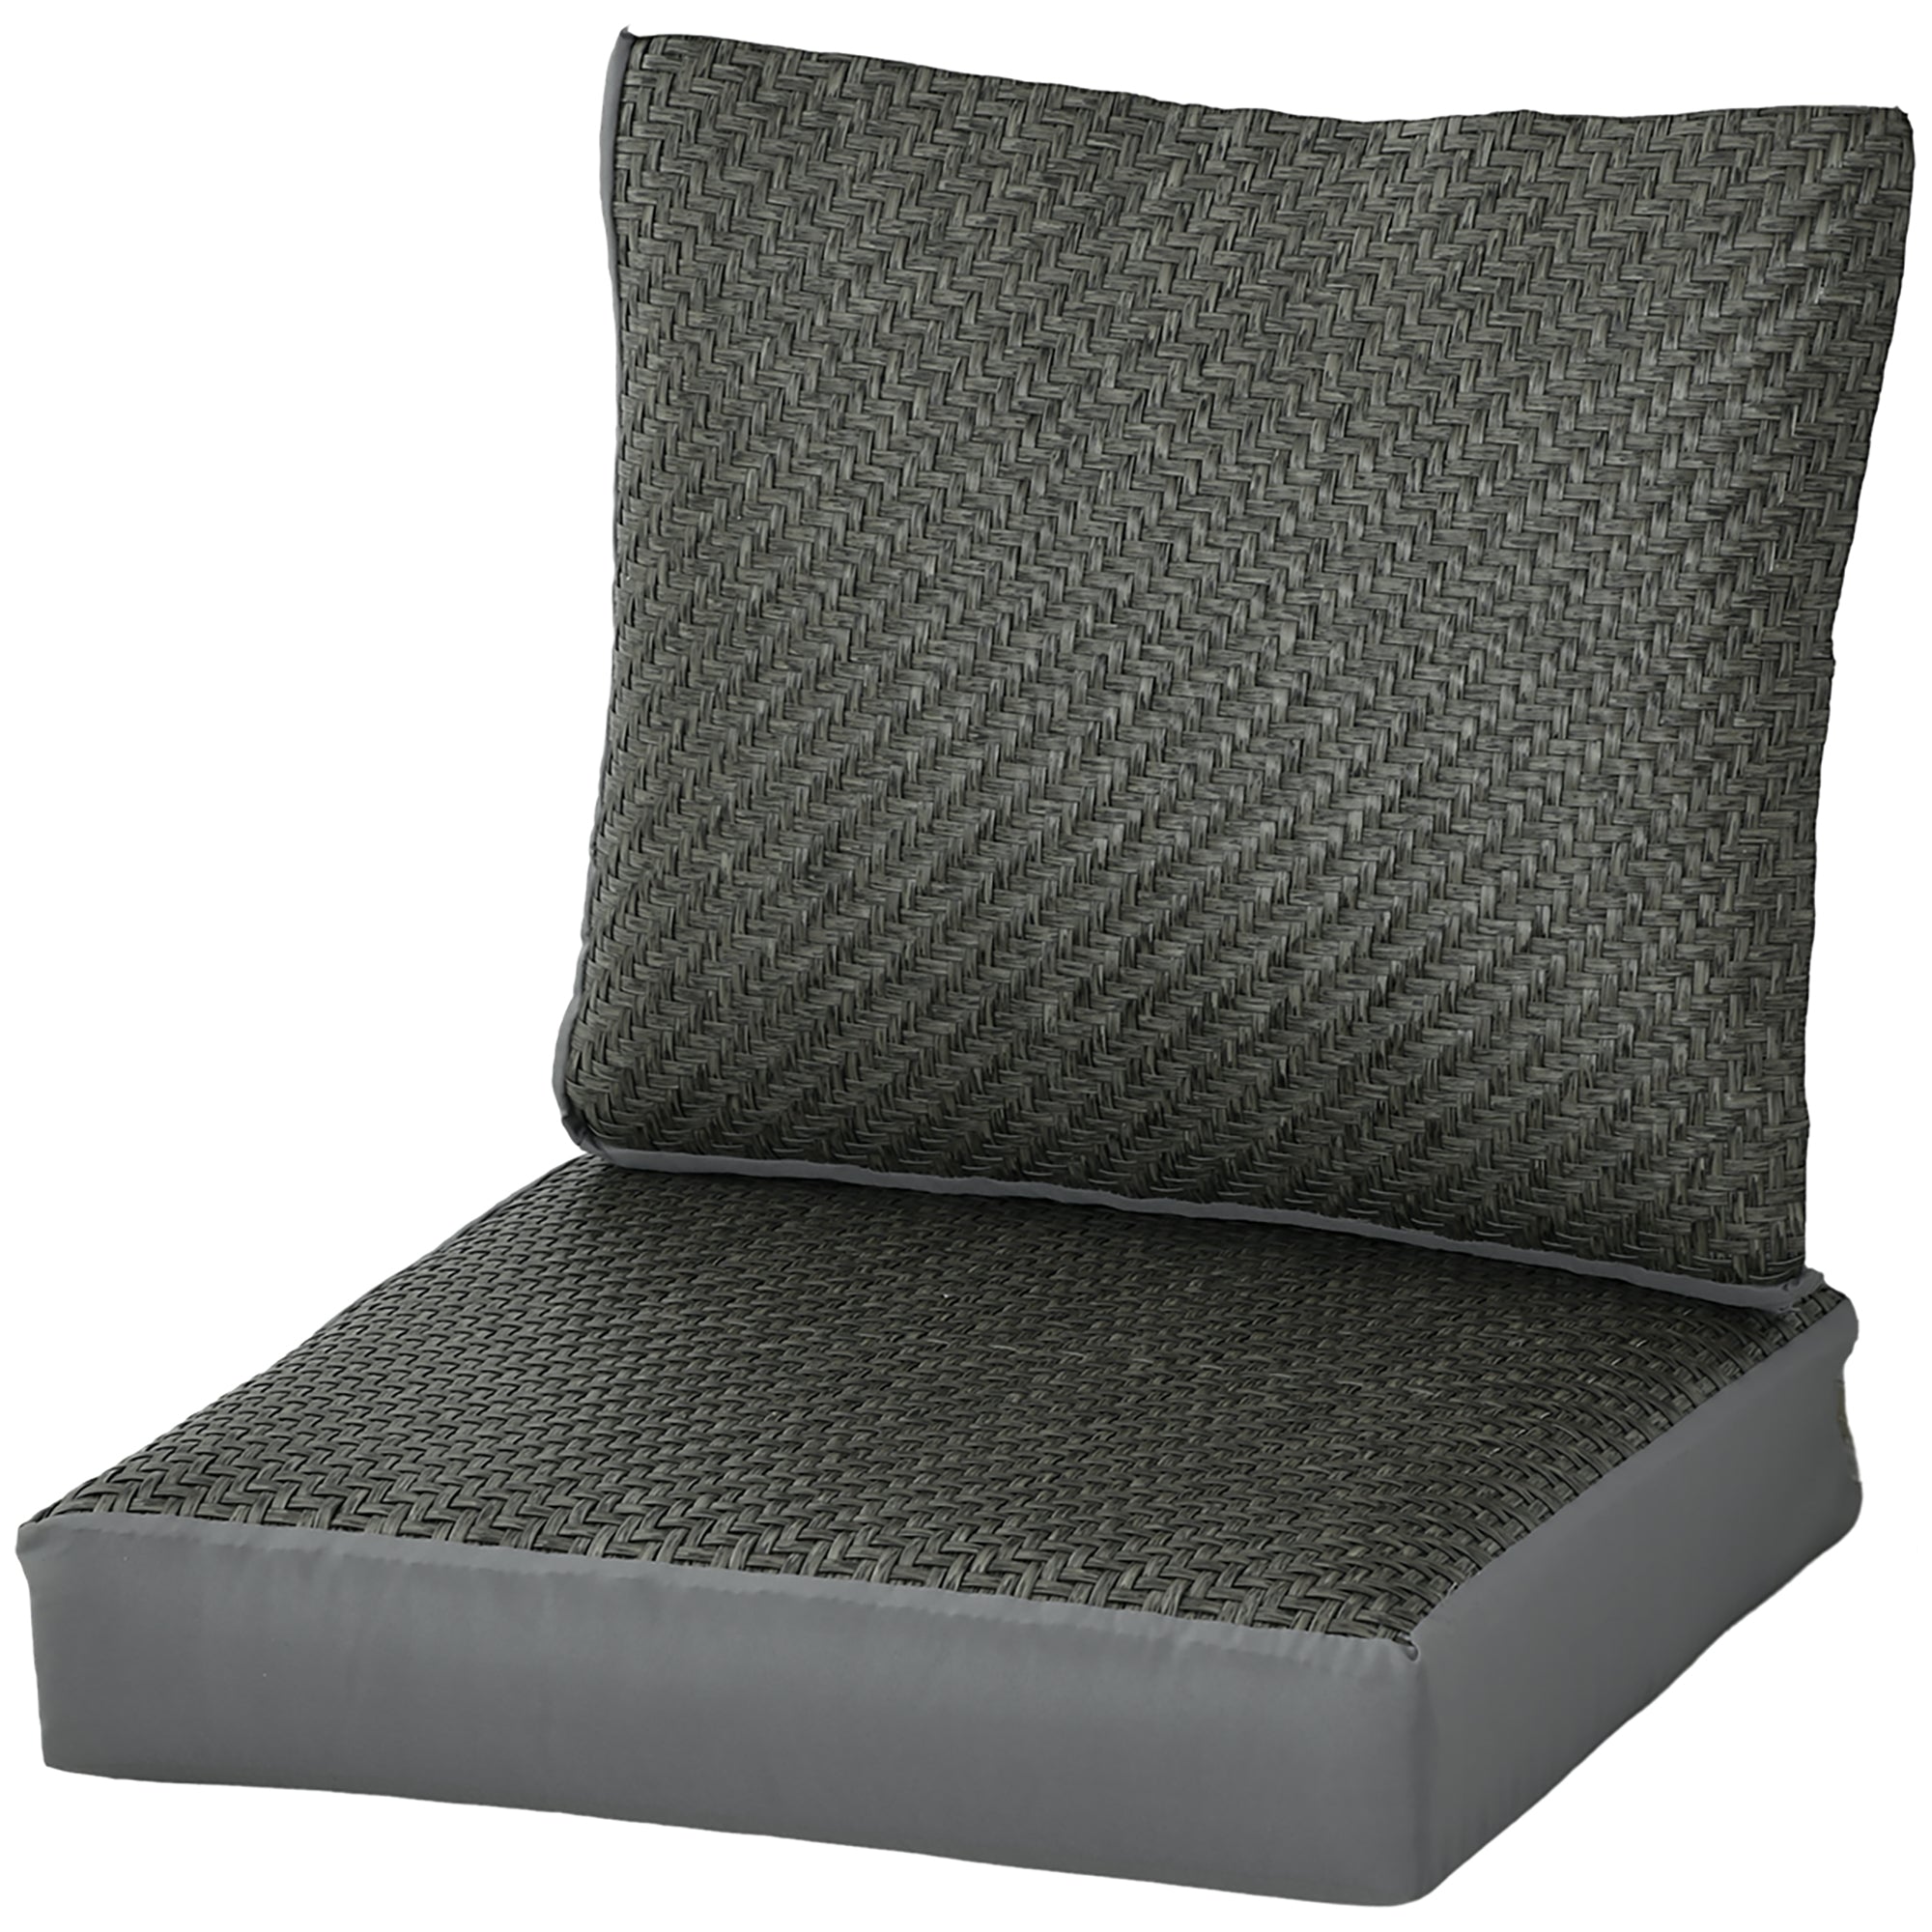 2-Piece Back and Seat Cushion Pillows Replacement, Fabric and PE Rattan Patio Chair Cushions Set, Grey-0